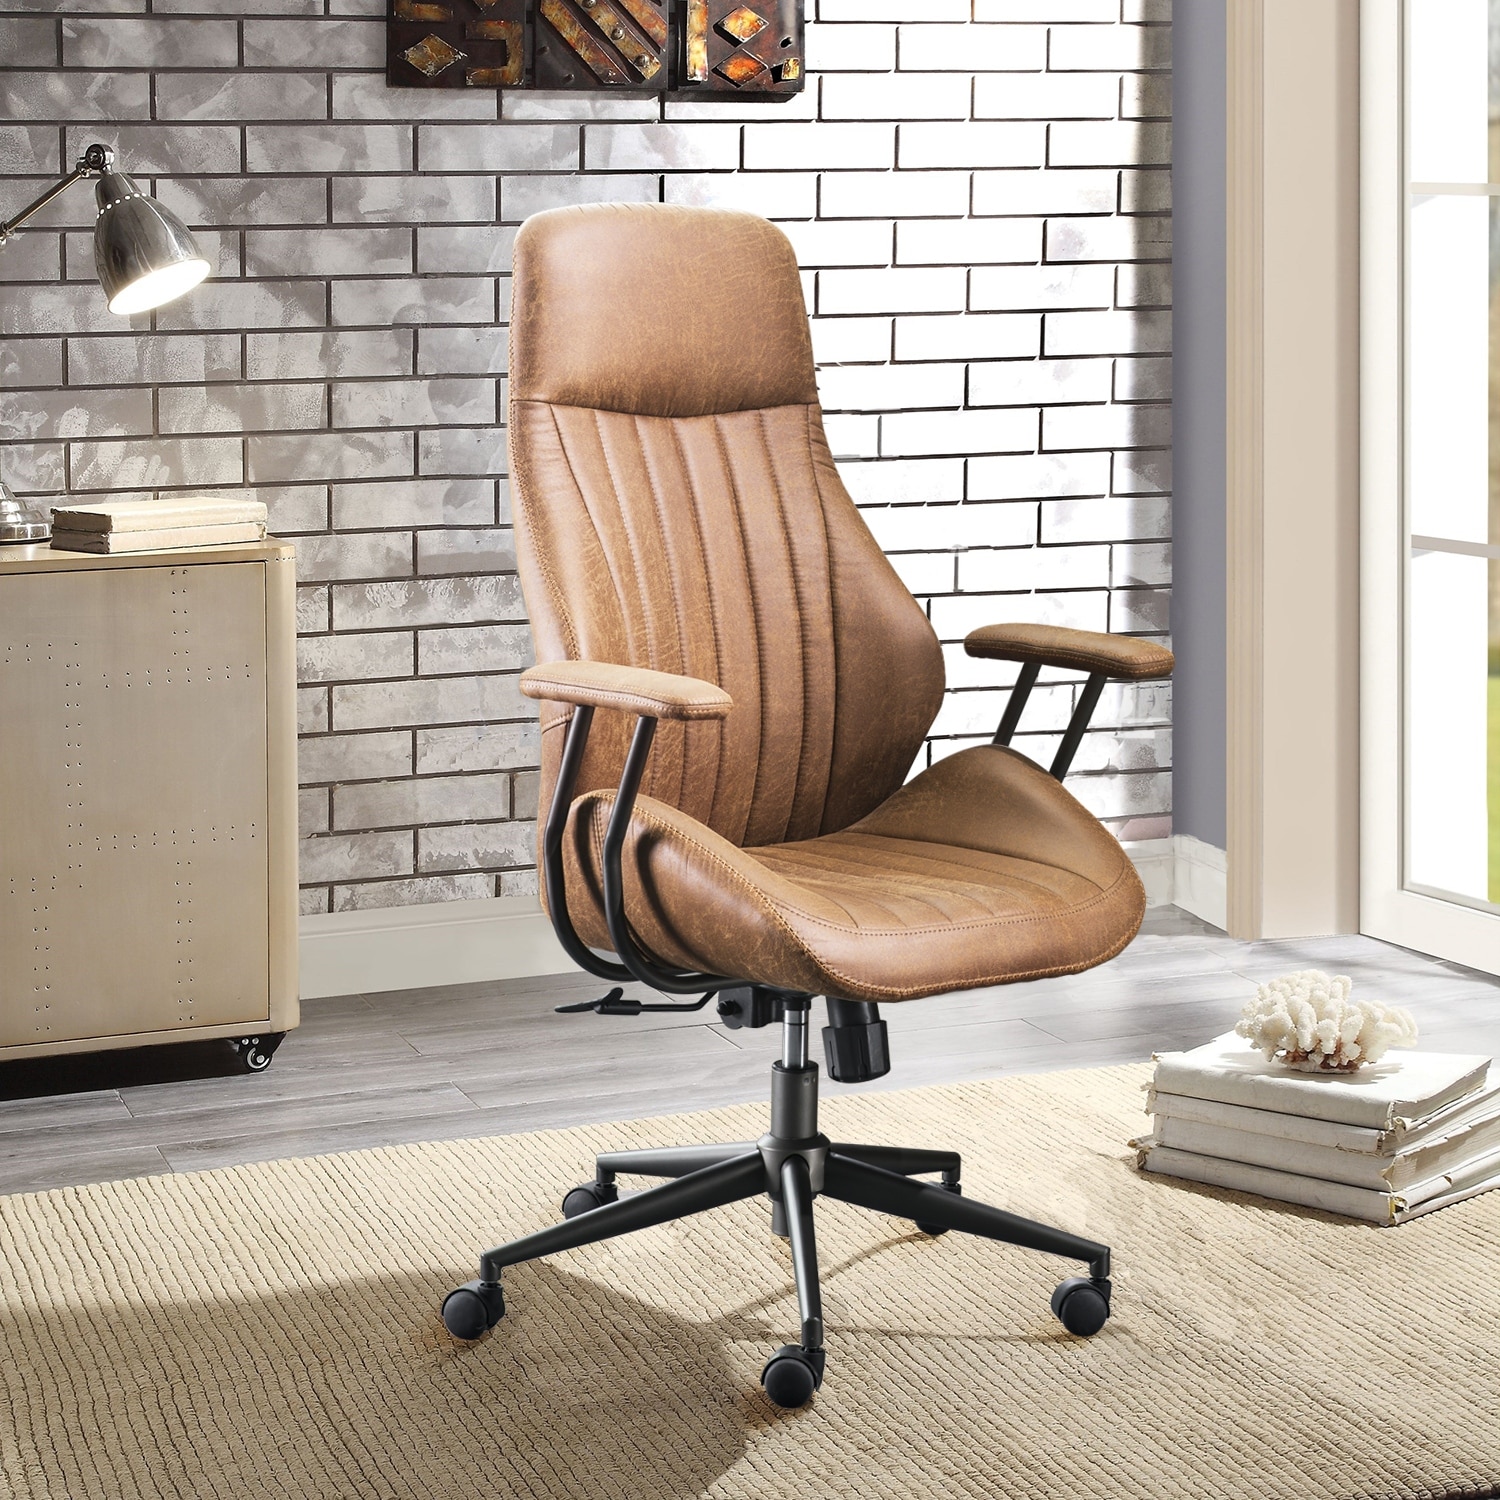 https://ak1.ostkcdn.com/images/products/is/images/direct/b5b7c437389883c05bd64716a3c63fa65807568a/OVIOS-Ergonomic-Office-Chair-Modern-Computer-Desk-Chair-high-Back-Suede-Fabric-Desk-Chair-with-Lumbar-Support.jpg